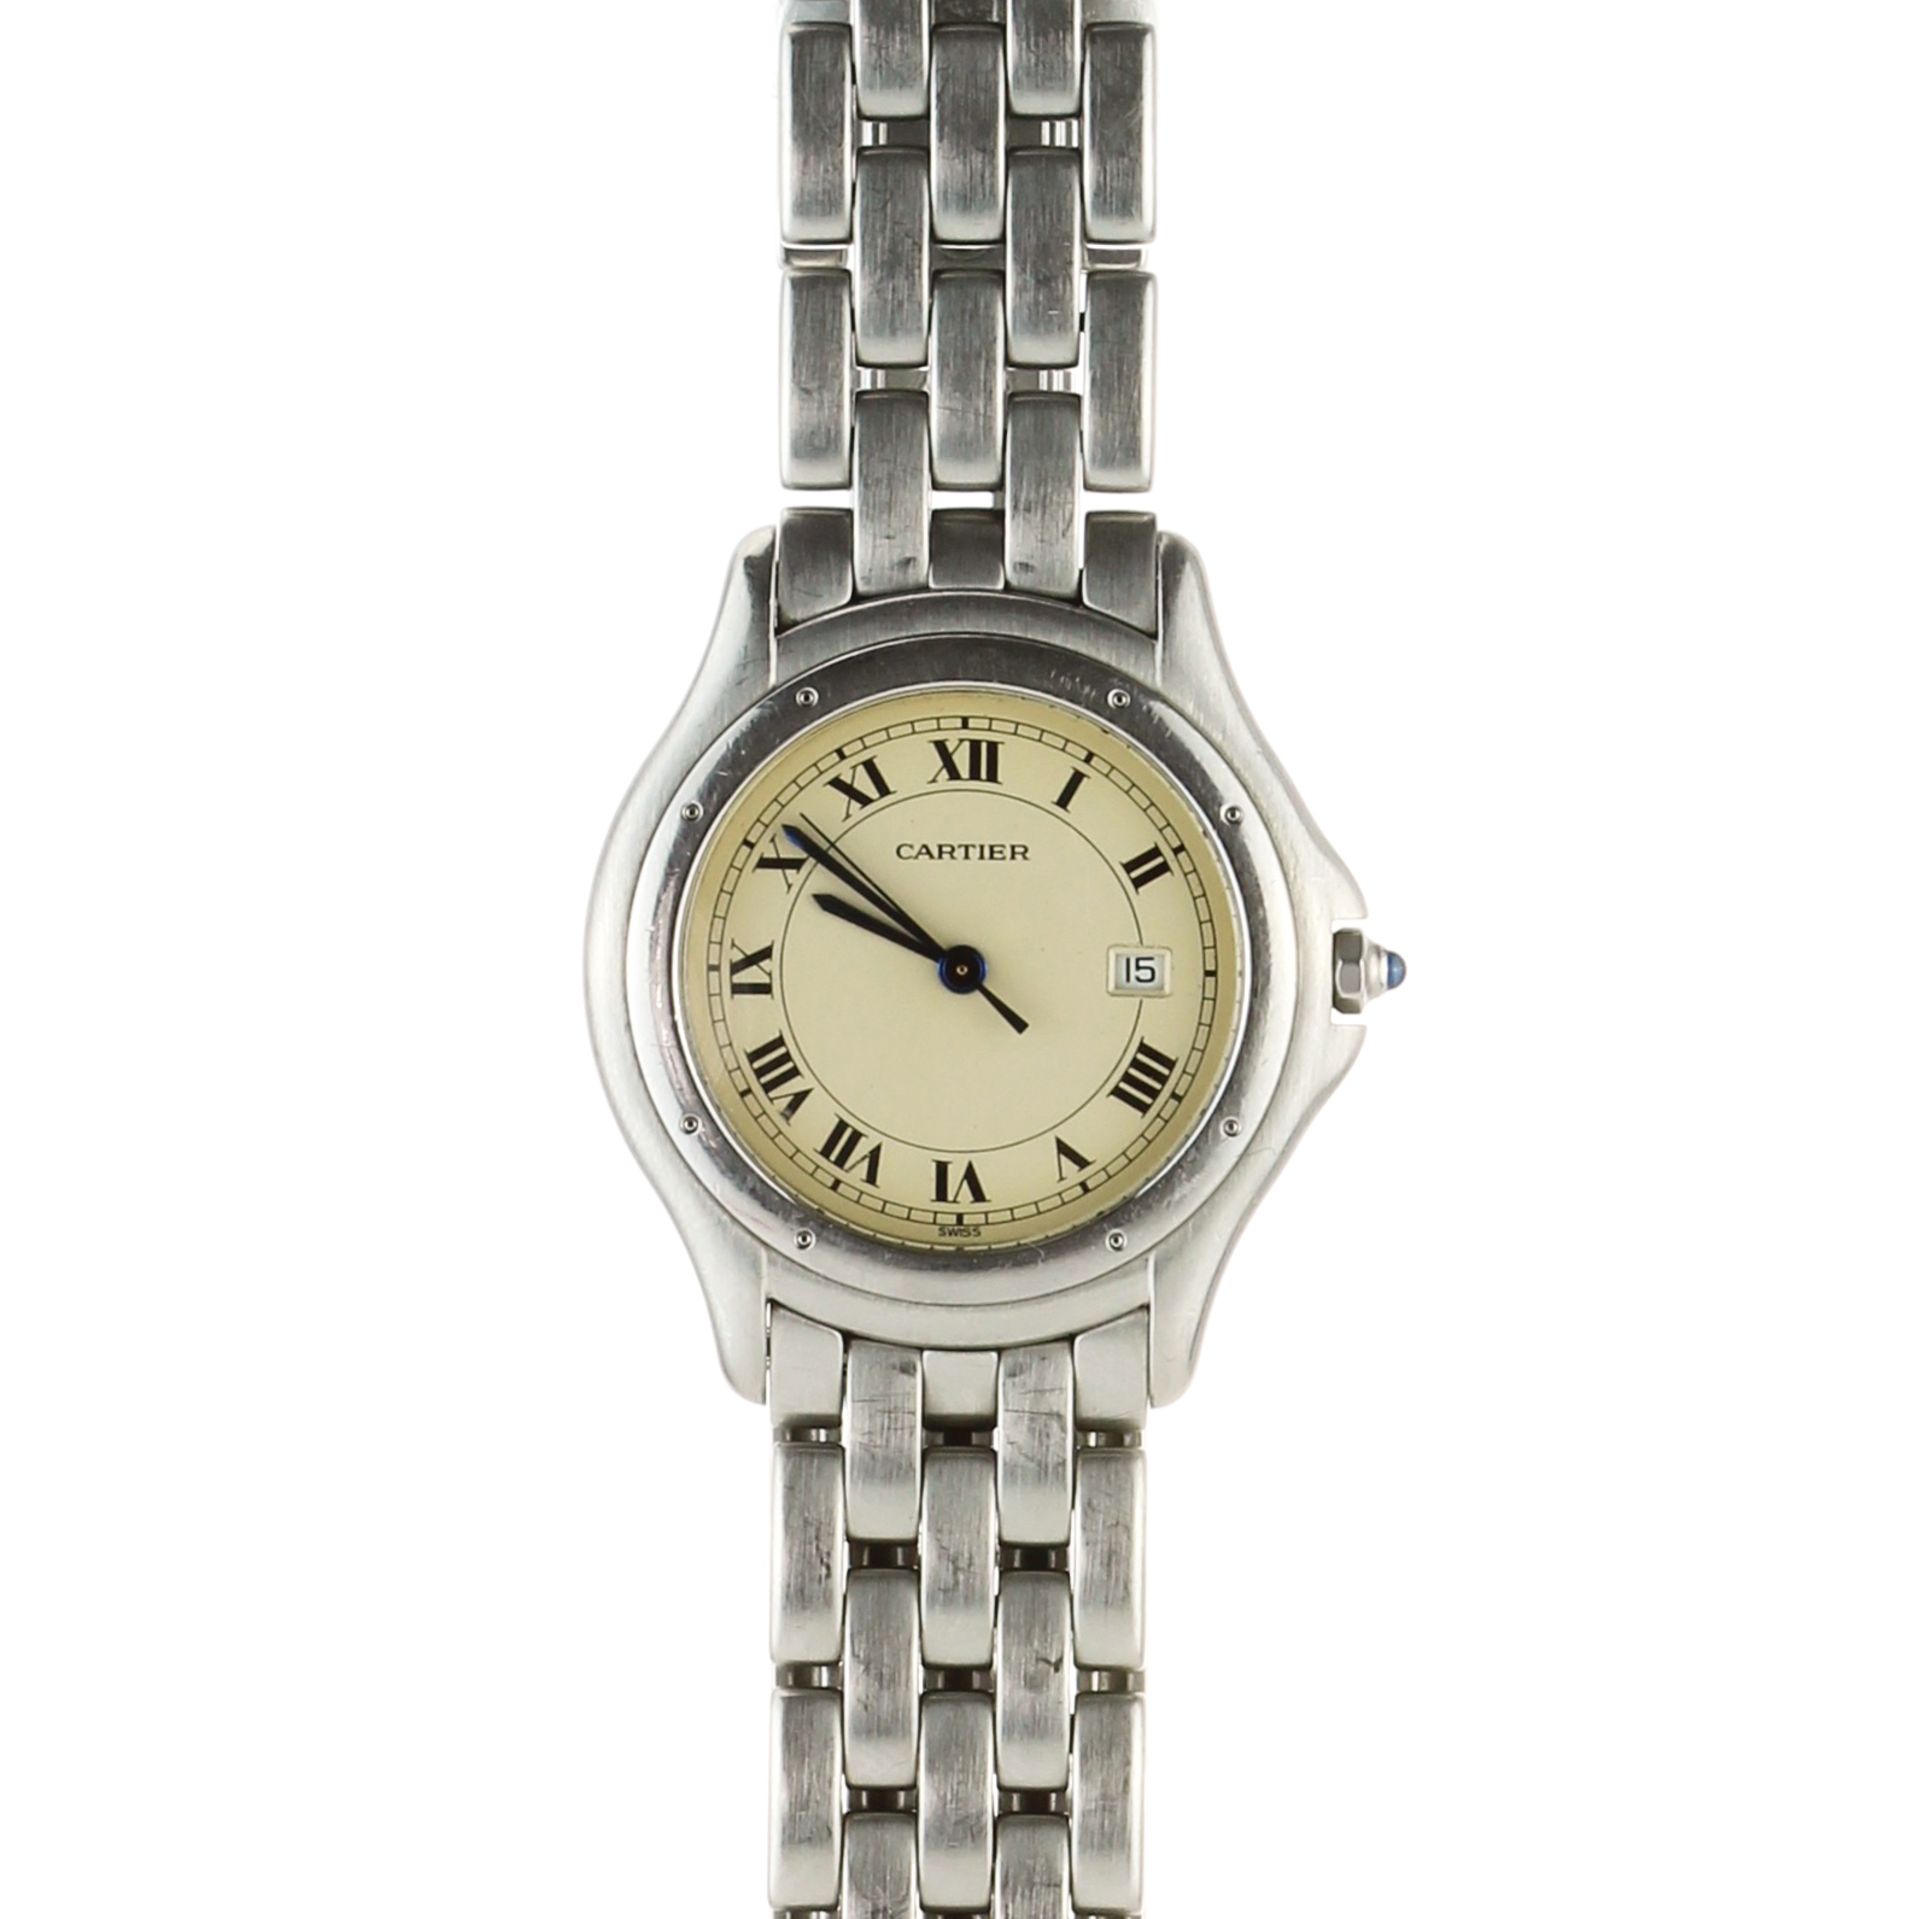 CARTIER A stainless steel Panthere Cougar Quartz wristwatch by Cartier circa 1990 with 32x36mm